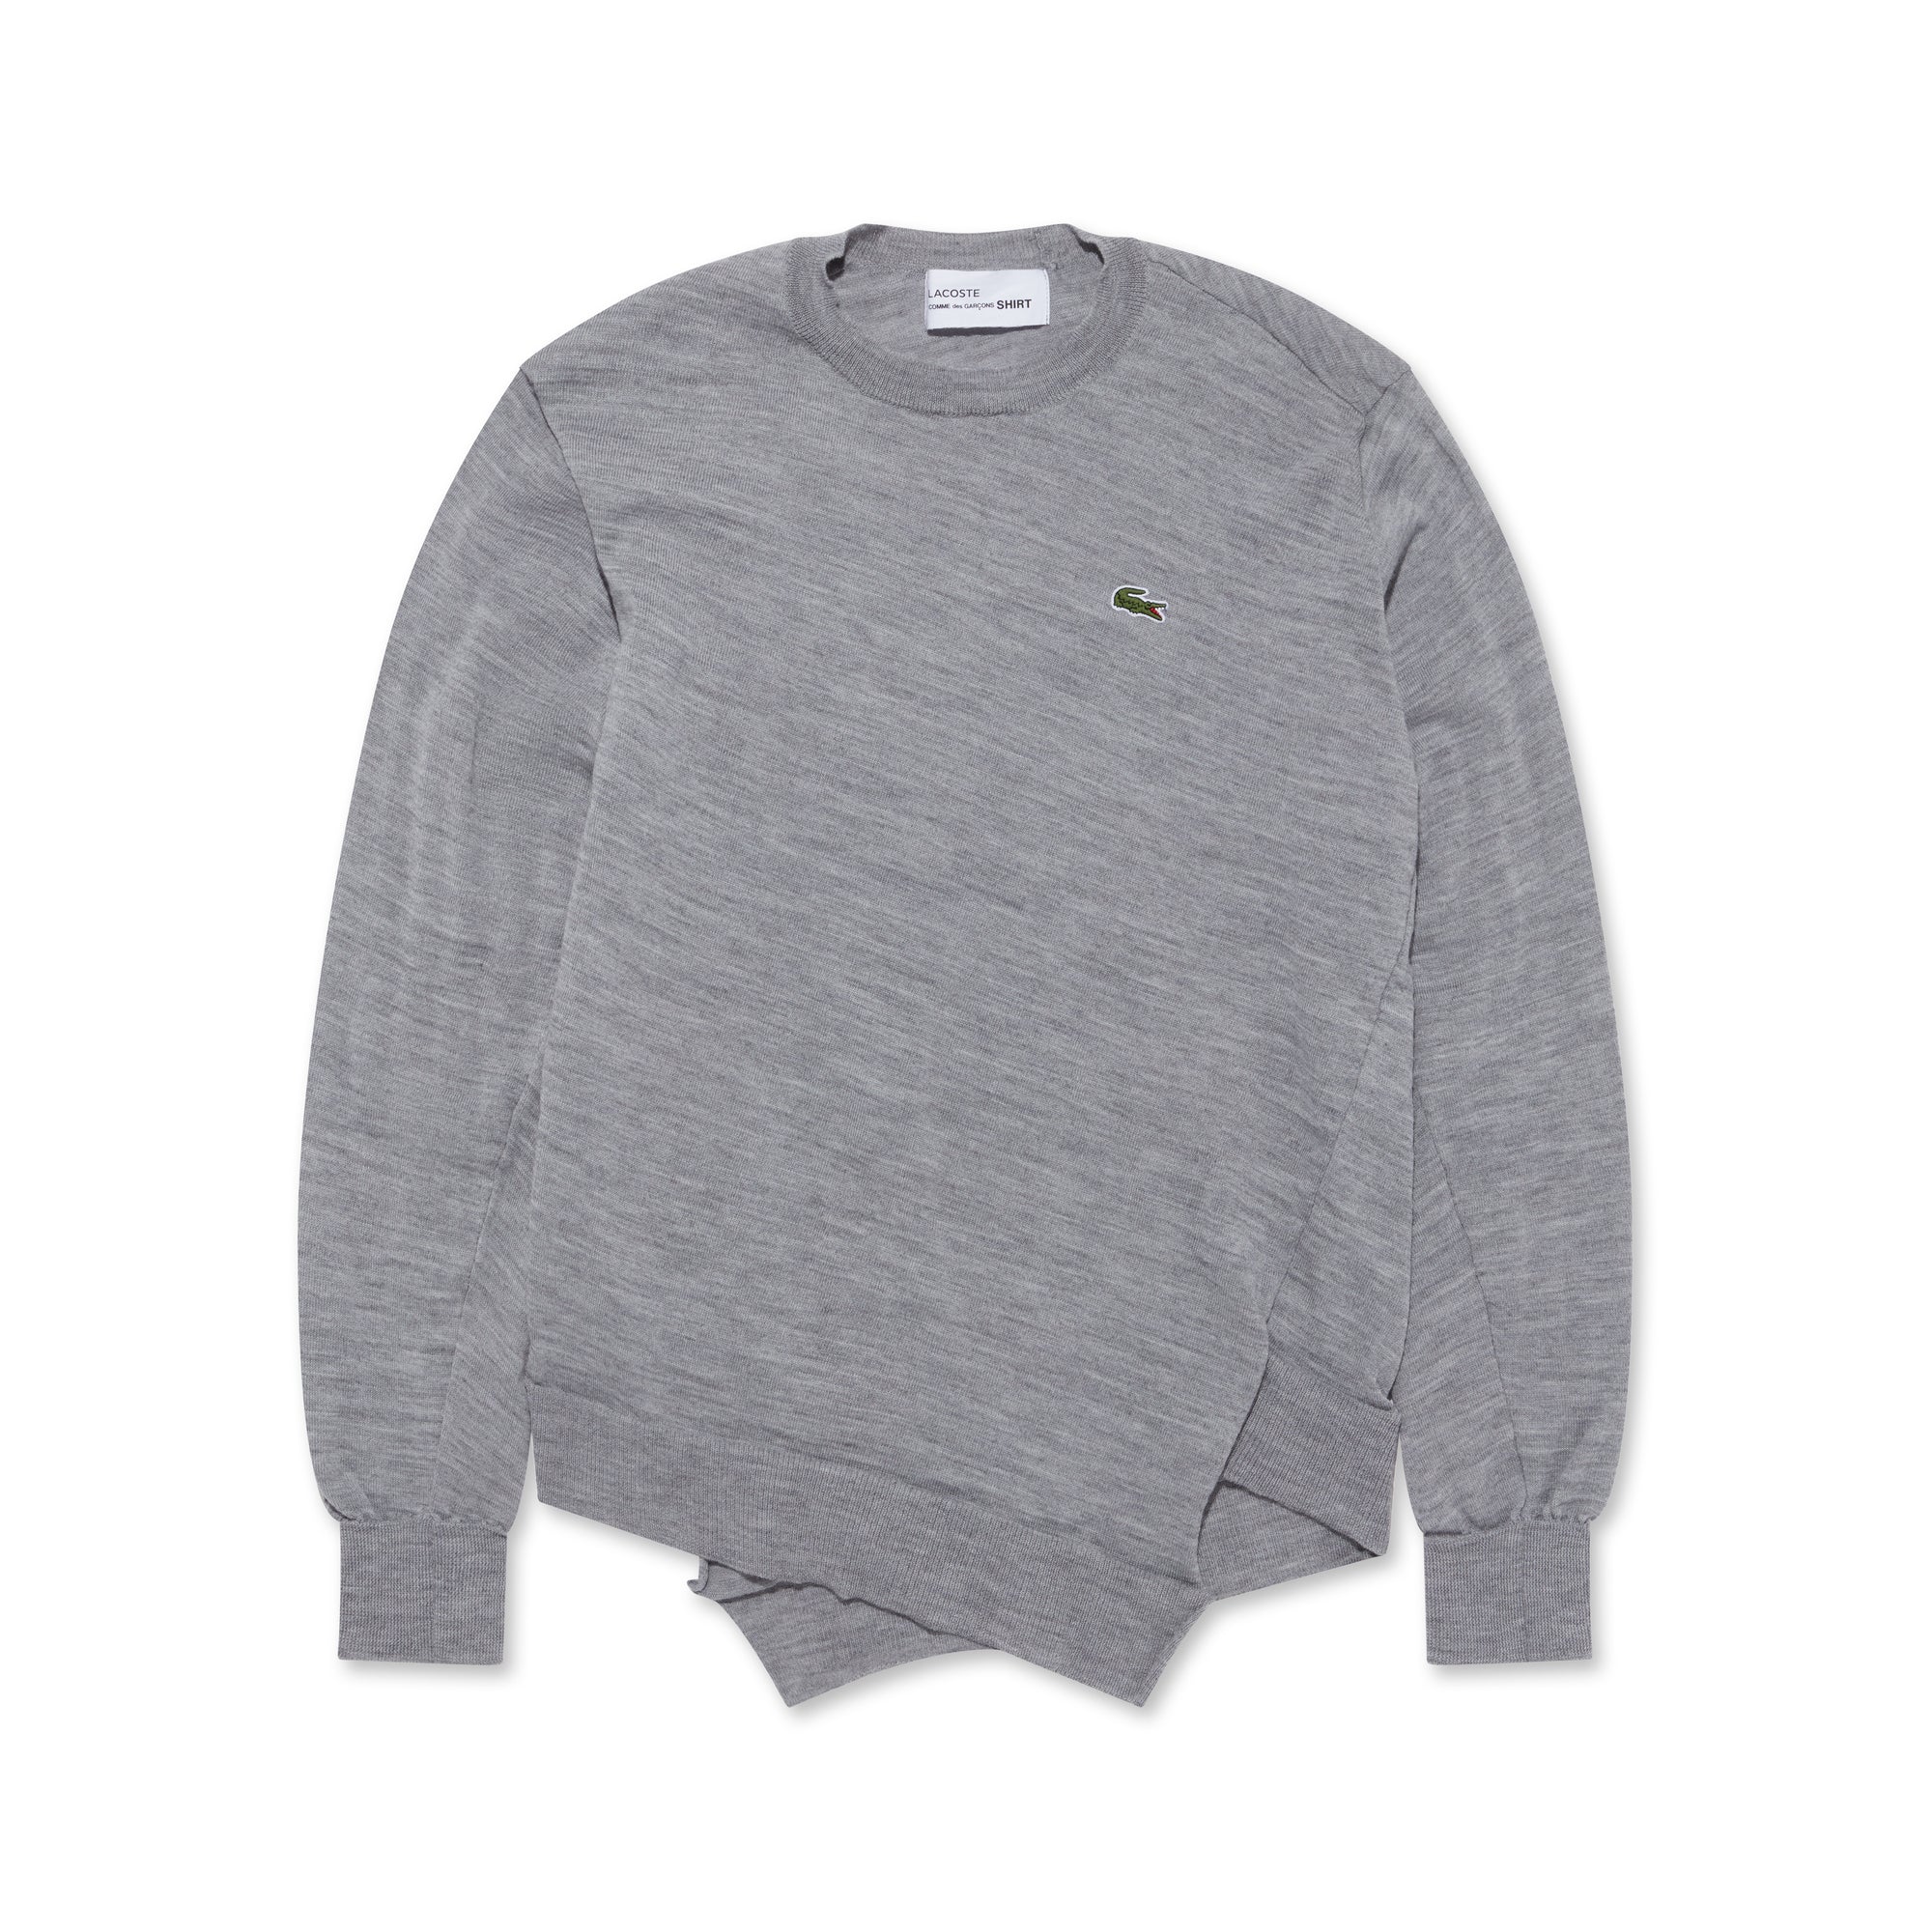 CDG Shirt - Lacoste Men’s Knit Sweater - (Grey) view 5